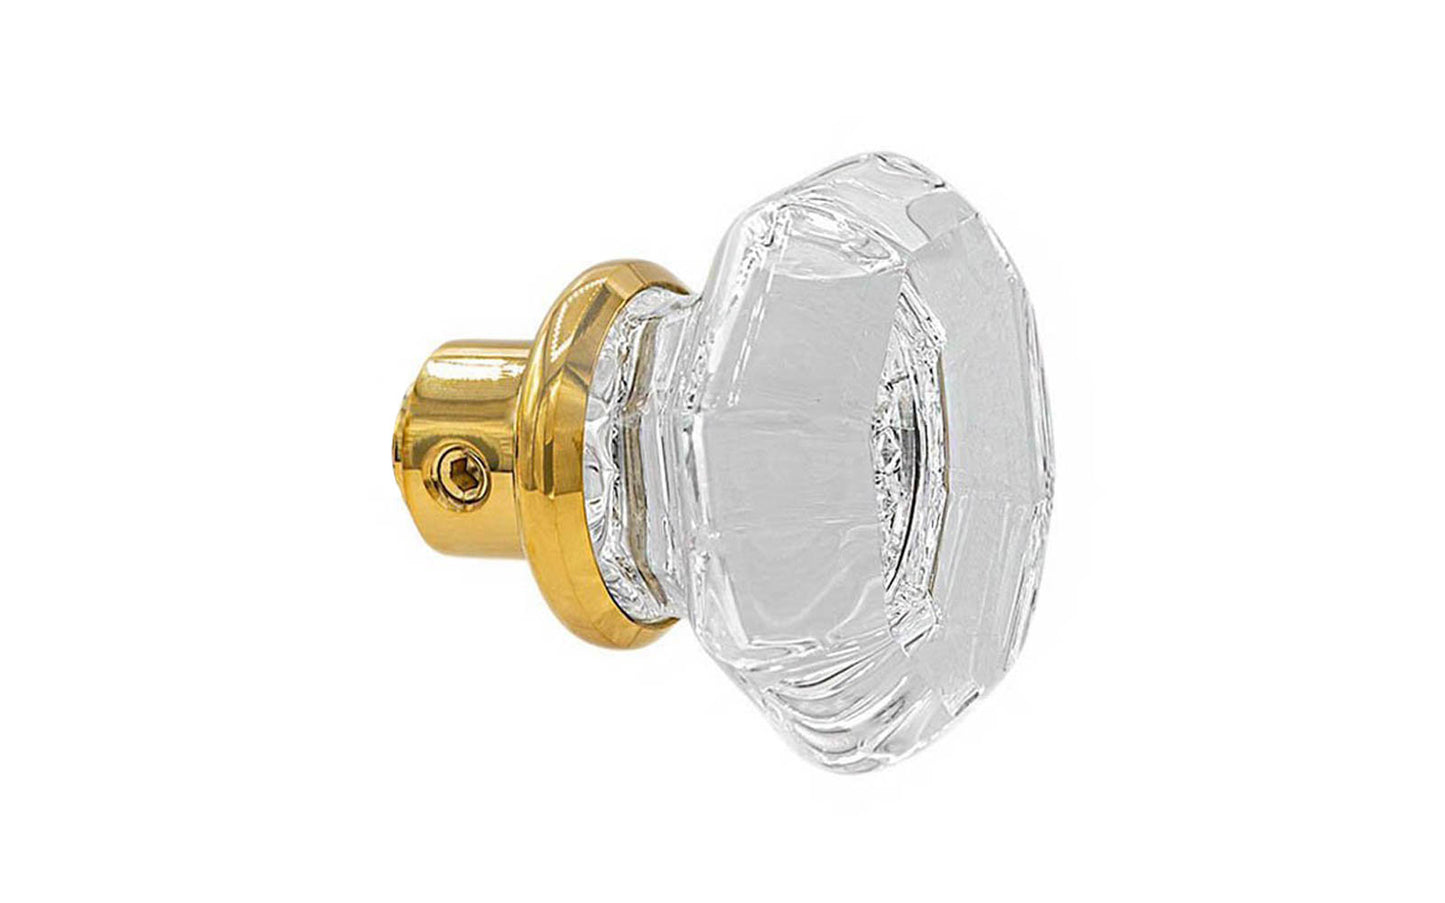 Single Classic Octagonal Clear Glass Doorknob. A high quality & genuine glass doorknob with an attractive Octagon design. The sparkling center point under glass amplifies reflected light to showcase beautiful facets. Solid brass base. Reproduction Glass Door Knobs. Traditional Octagonal Glass Knobs. One knob. Lacquered Brass Finish.